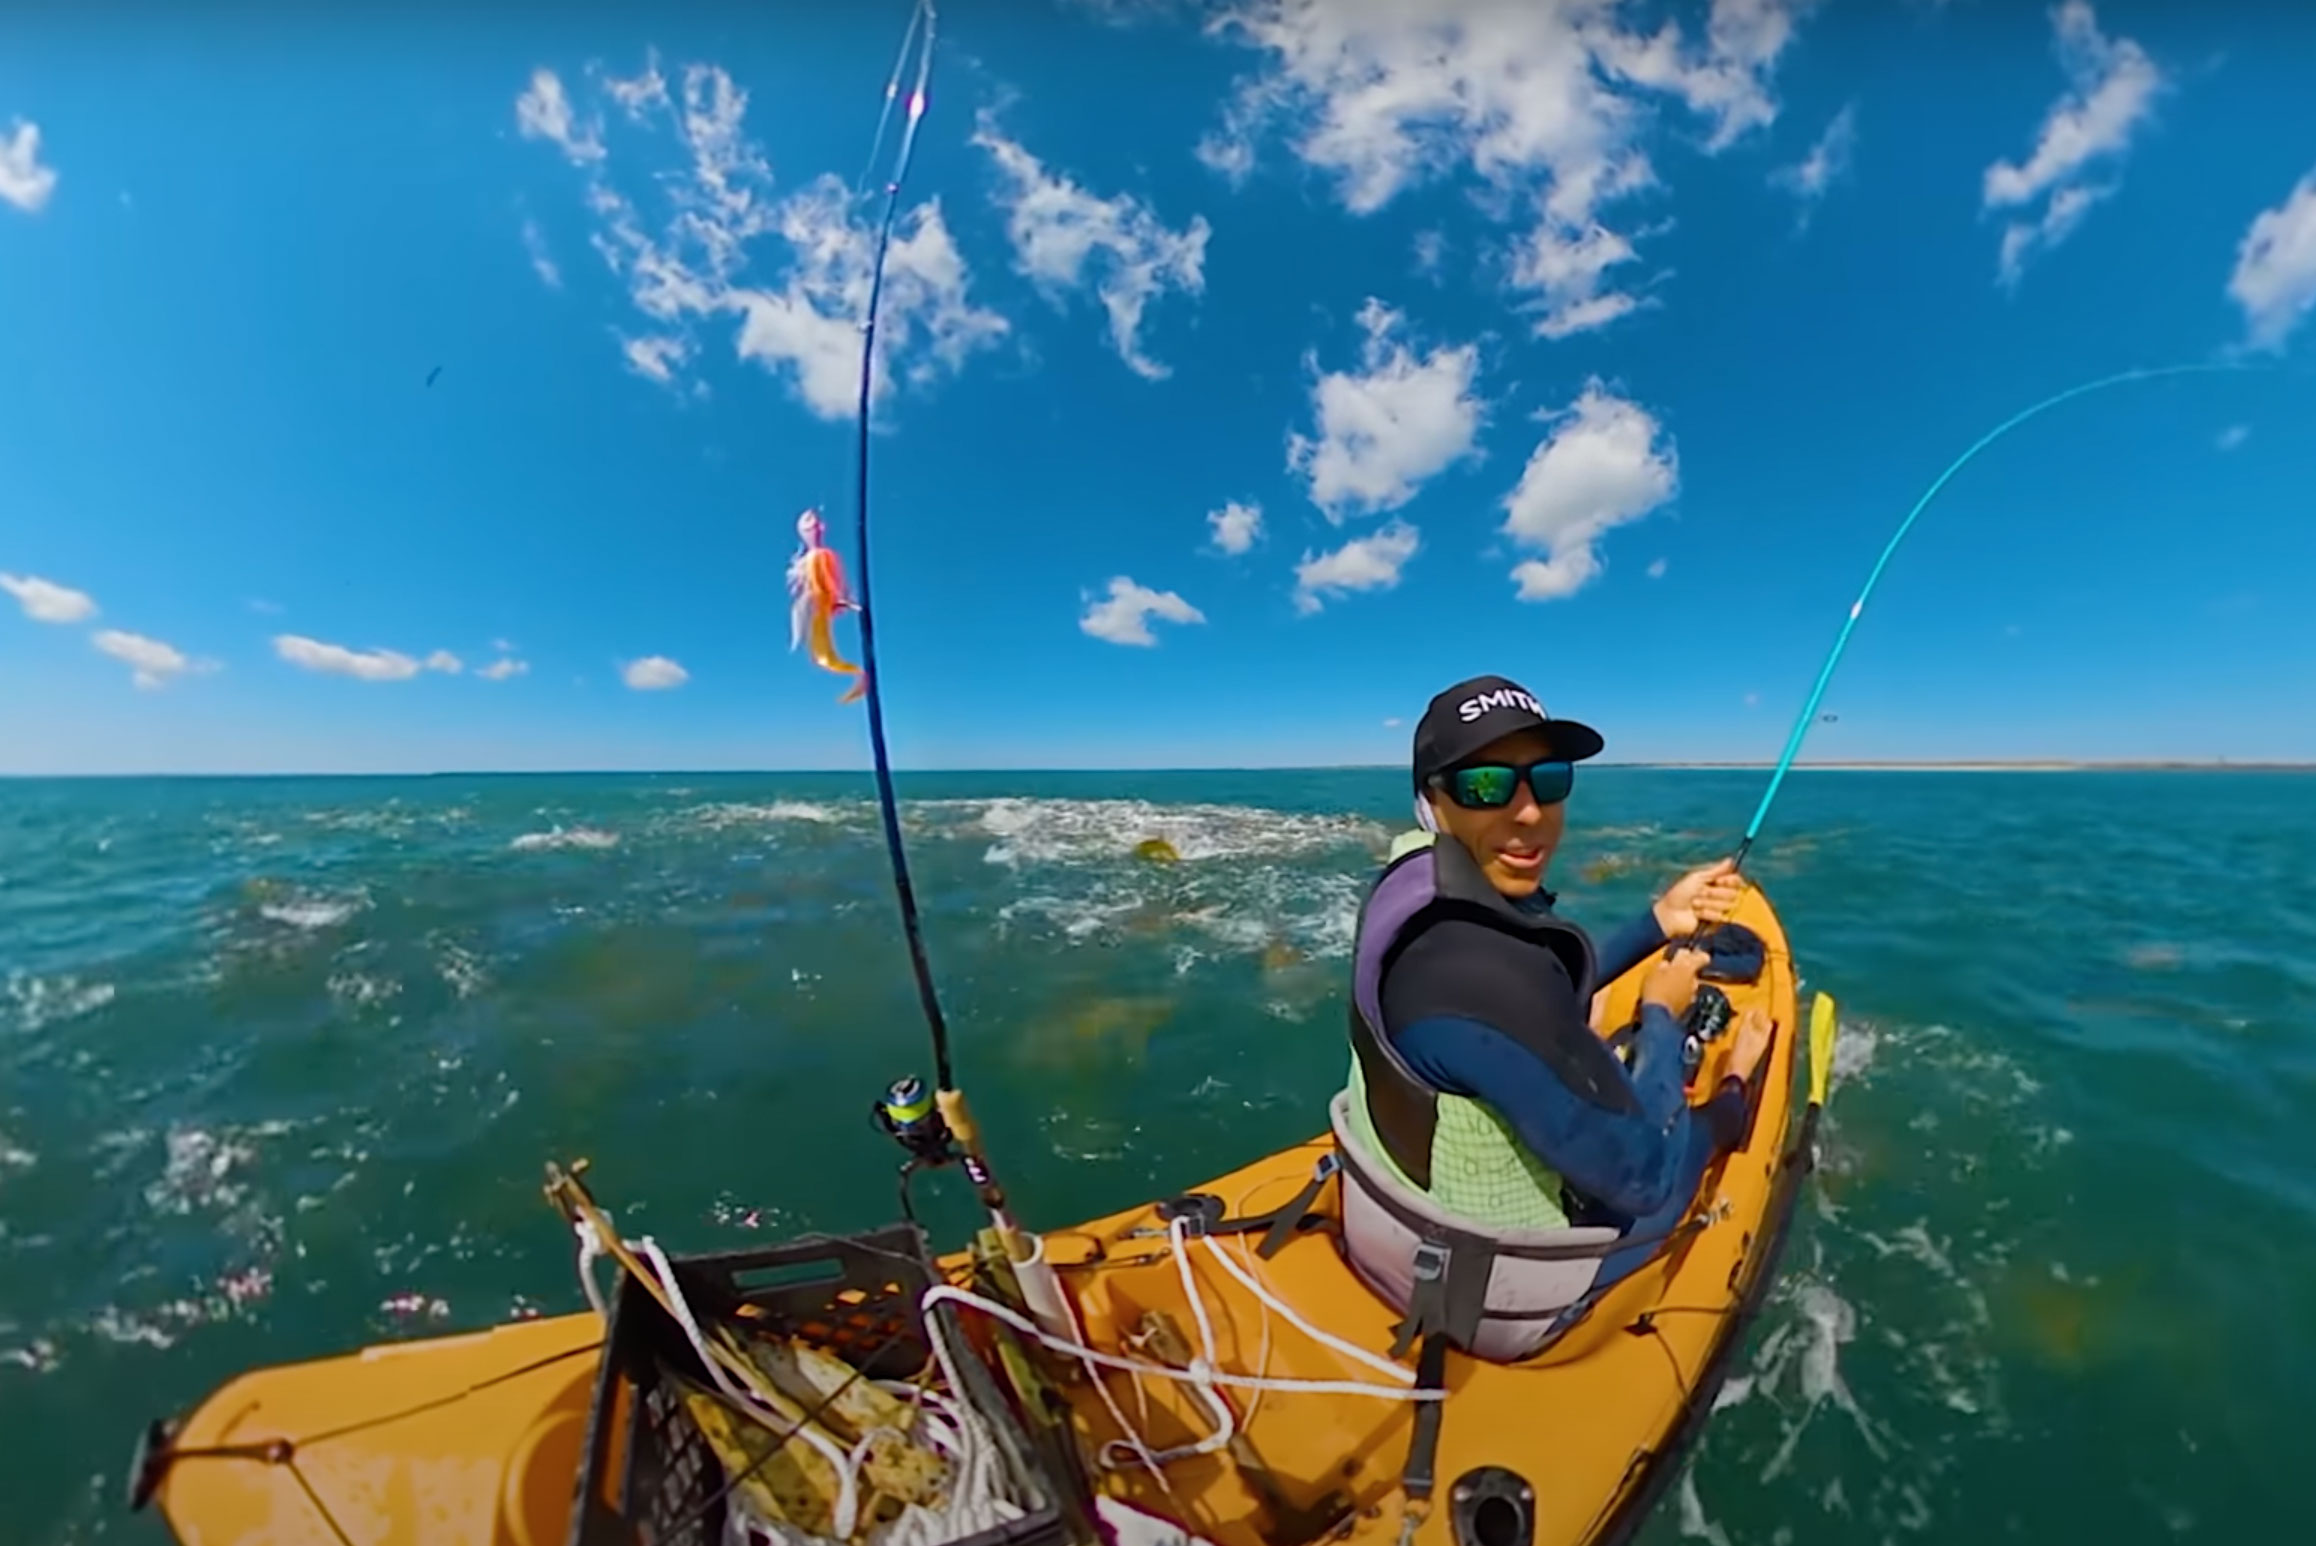 Brett Barley is swarmed by red drum while kayak fishing in the Outer Banks